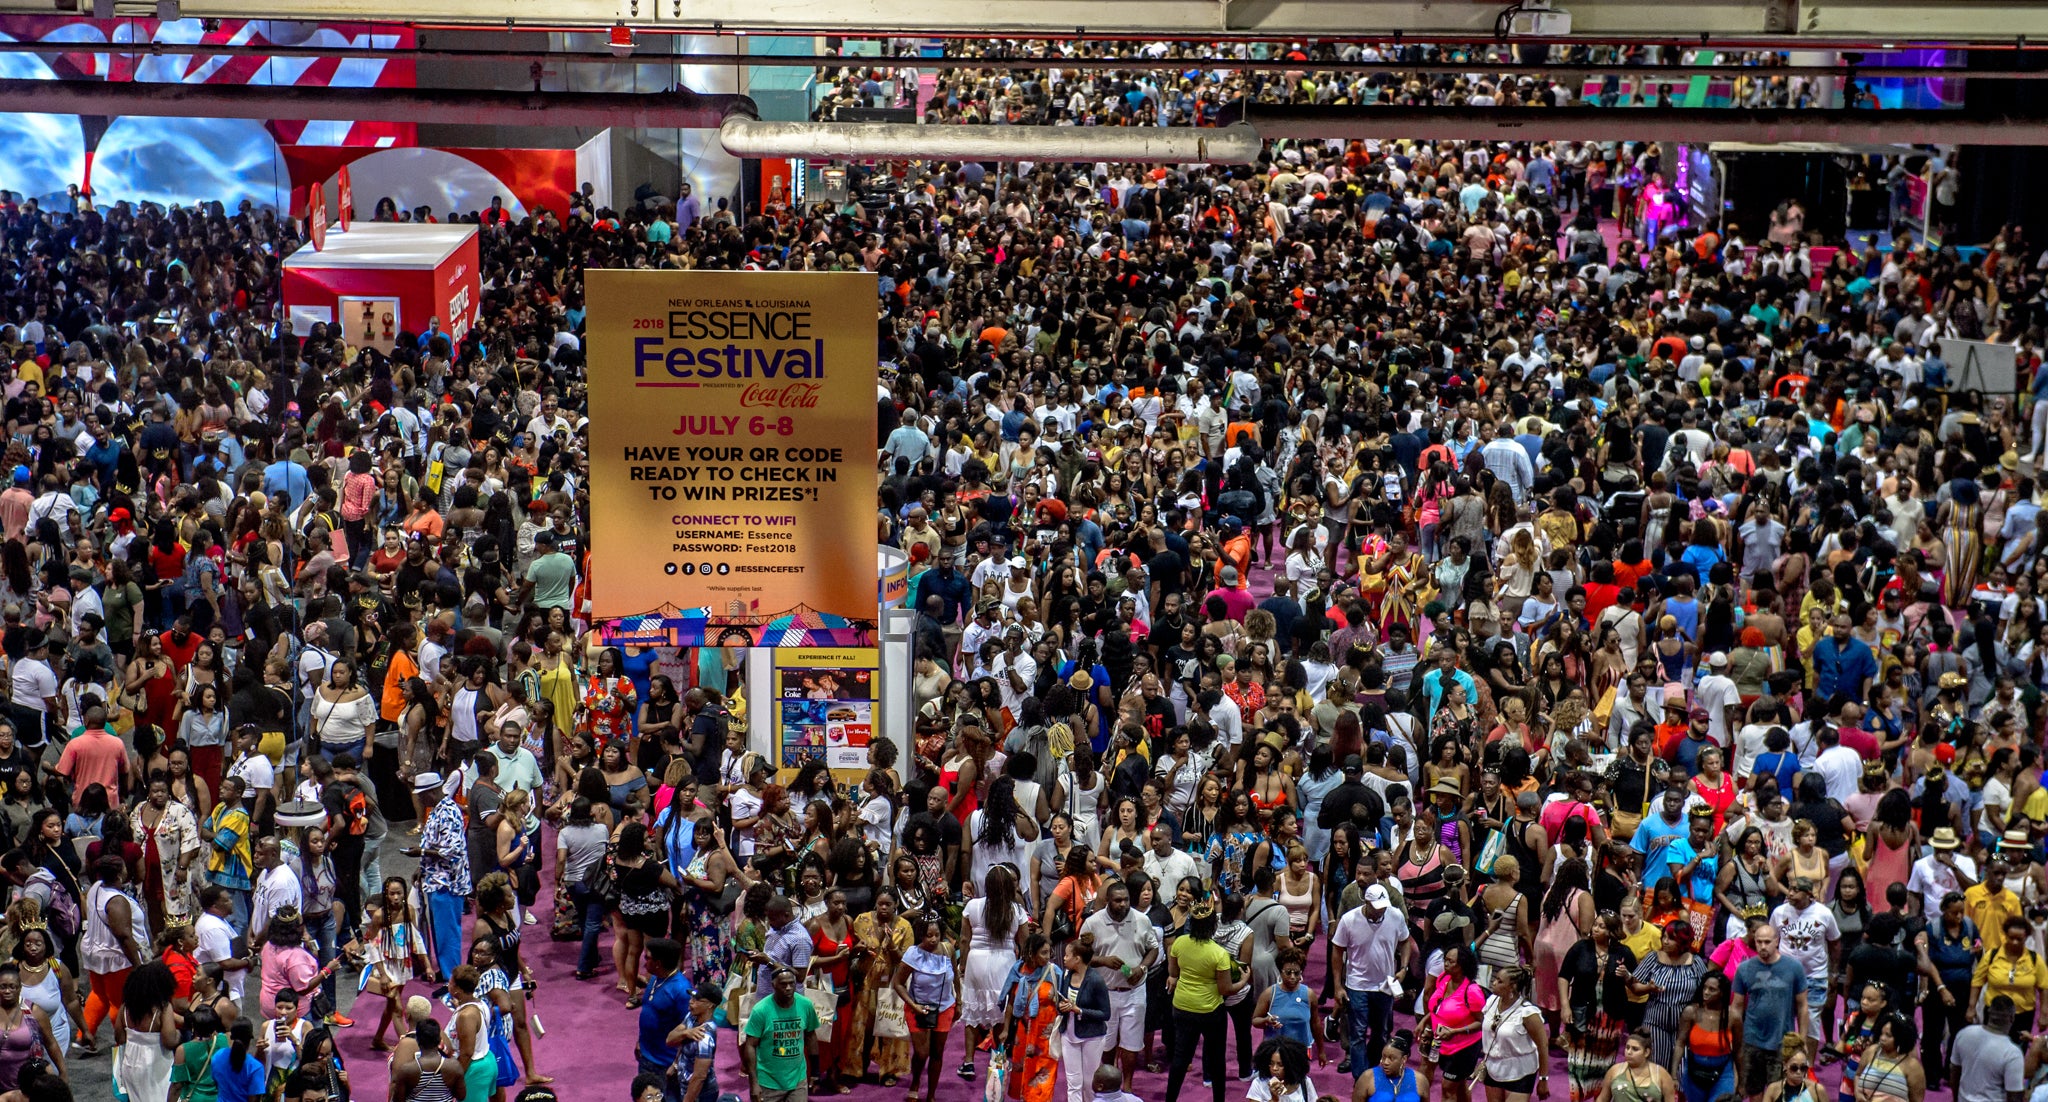 ESSENCE Festival 2018 Celebrates A $280 Million Economic Impact On The State Of Louisiana And The City Of New Orleans